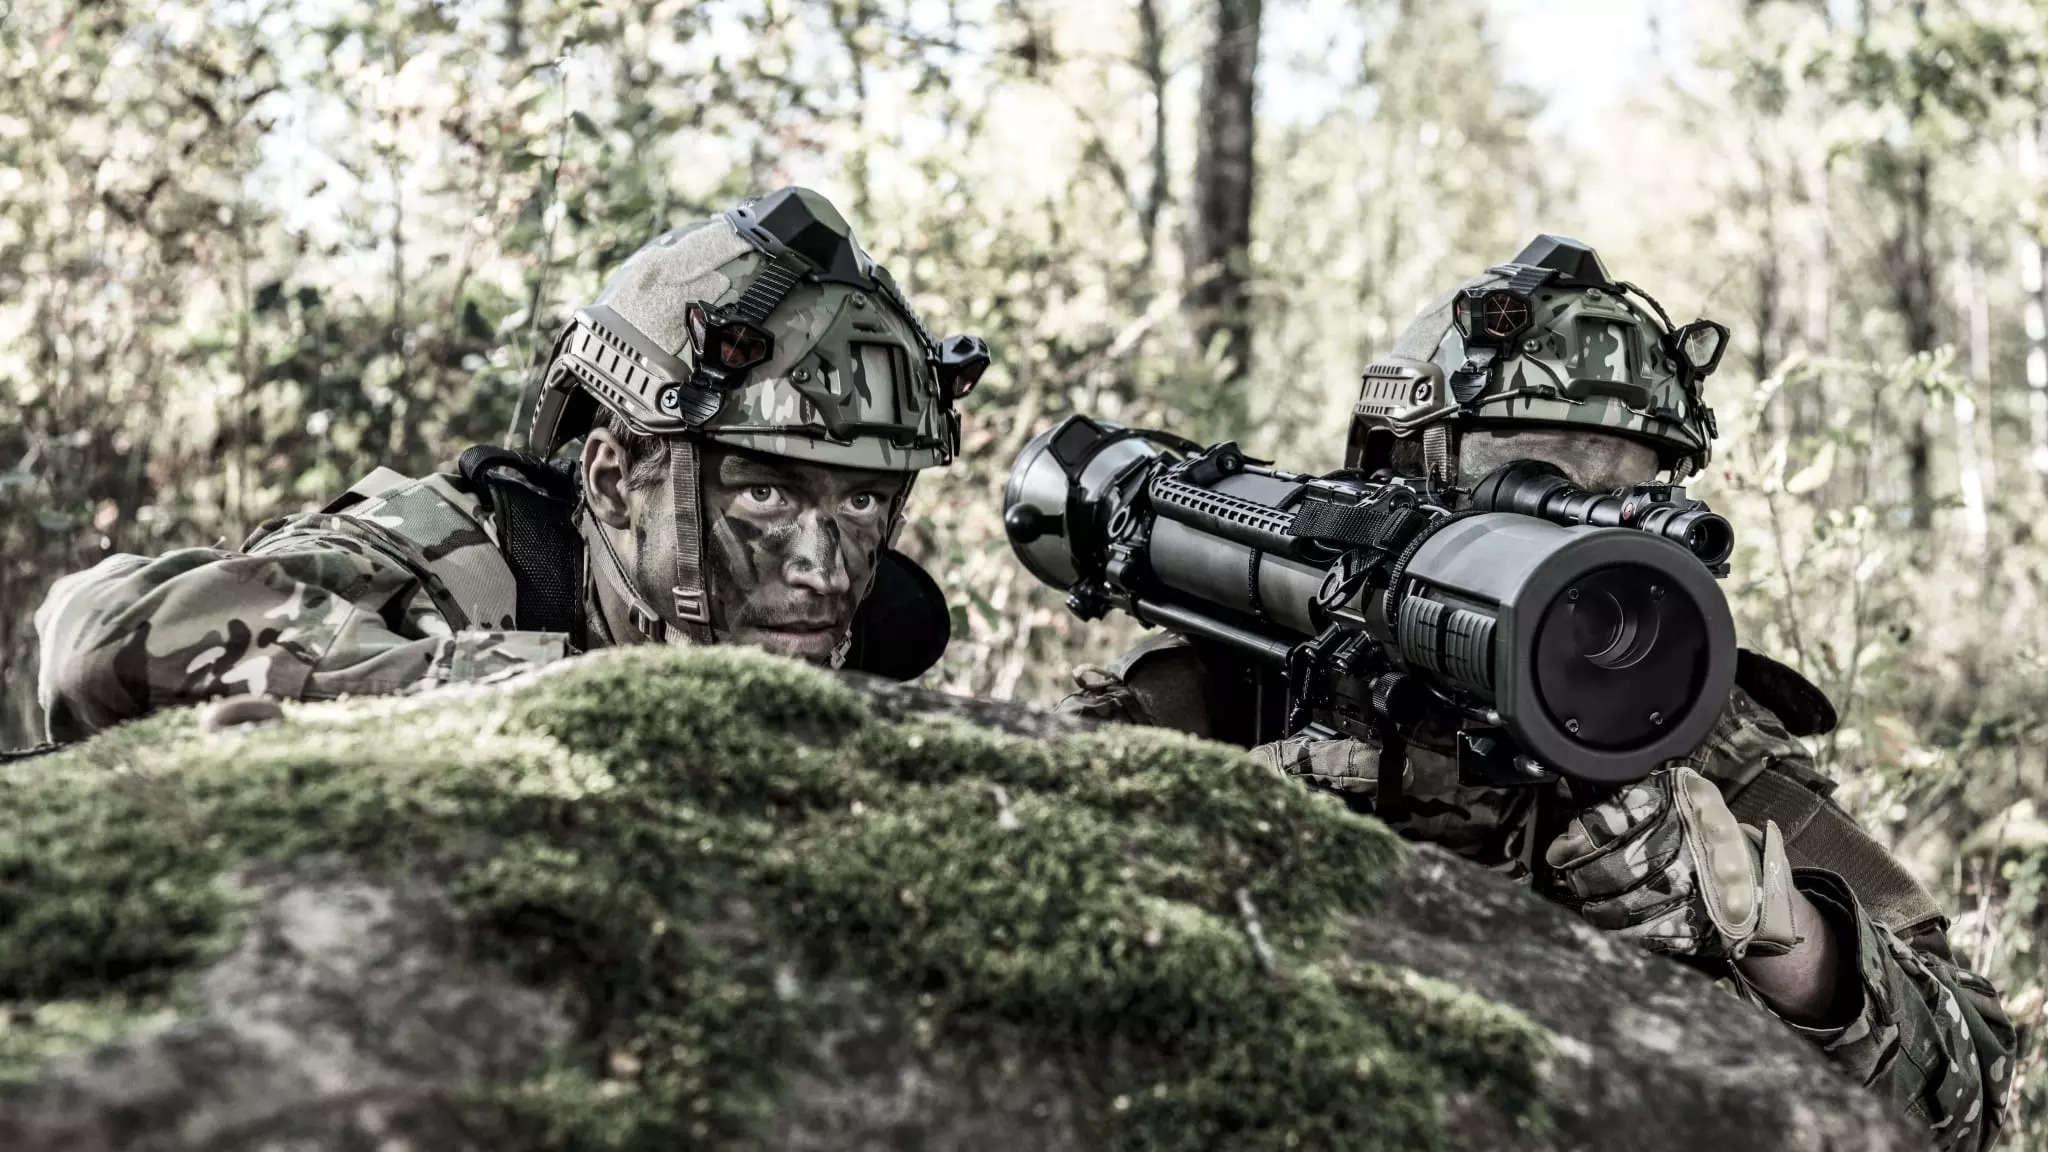 One Weapon Any Task What Is Carl Gustaf M4 All About The Swedish Weapon System To Be 